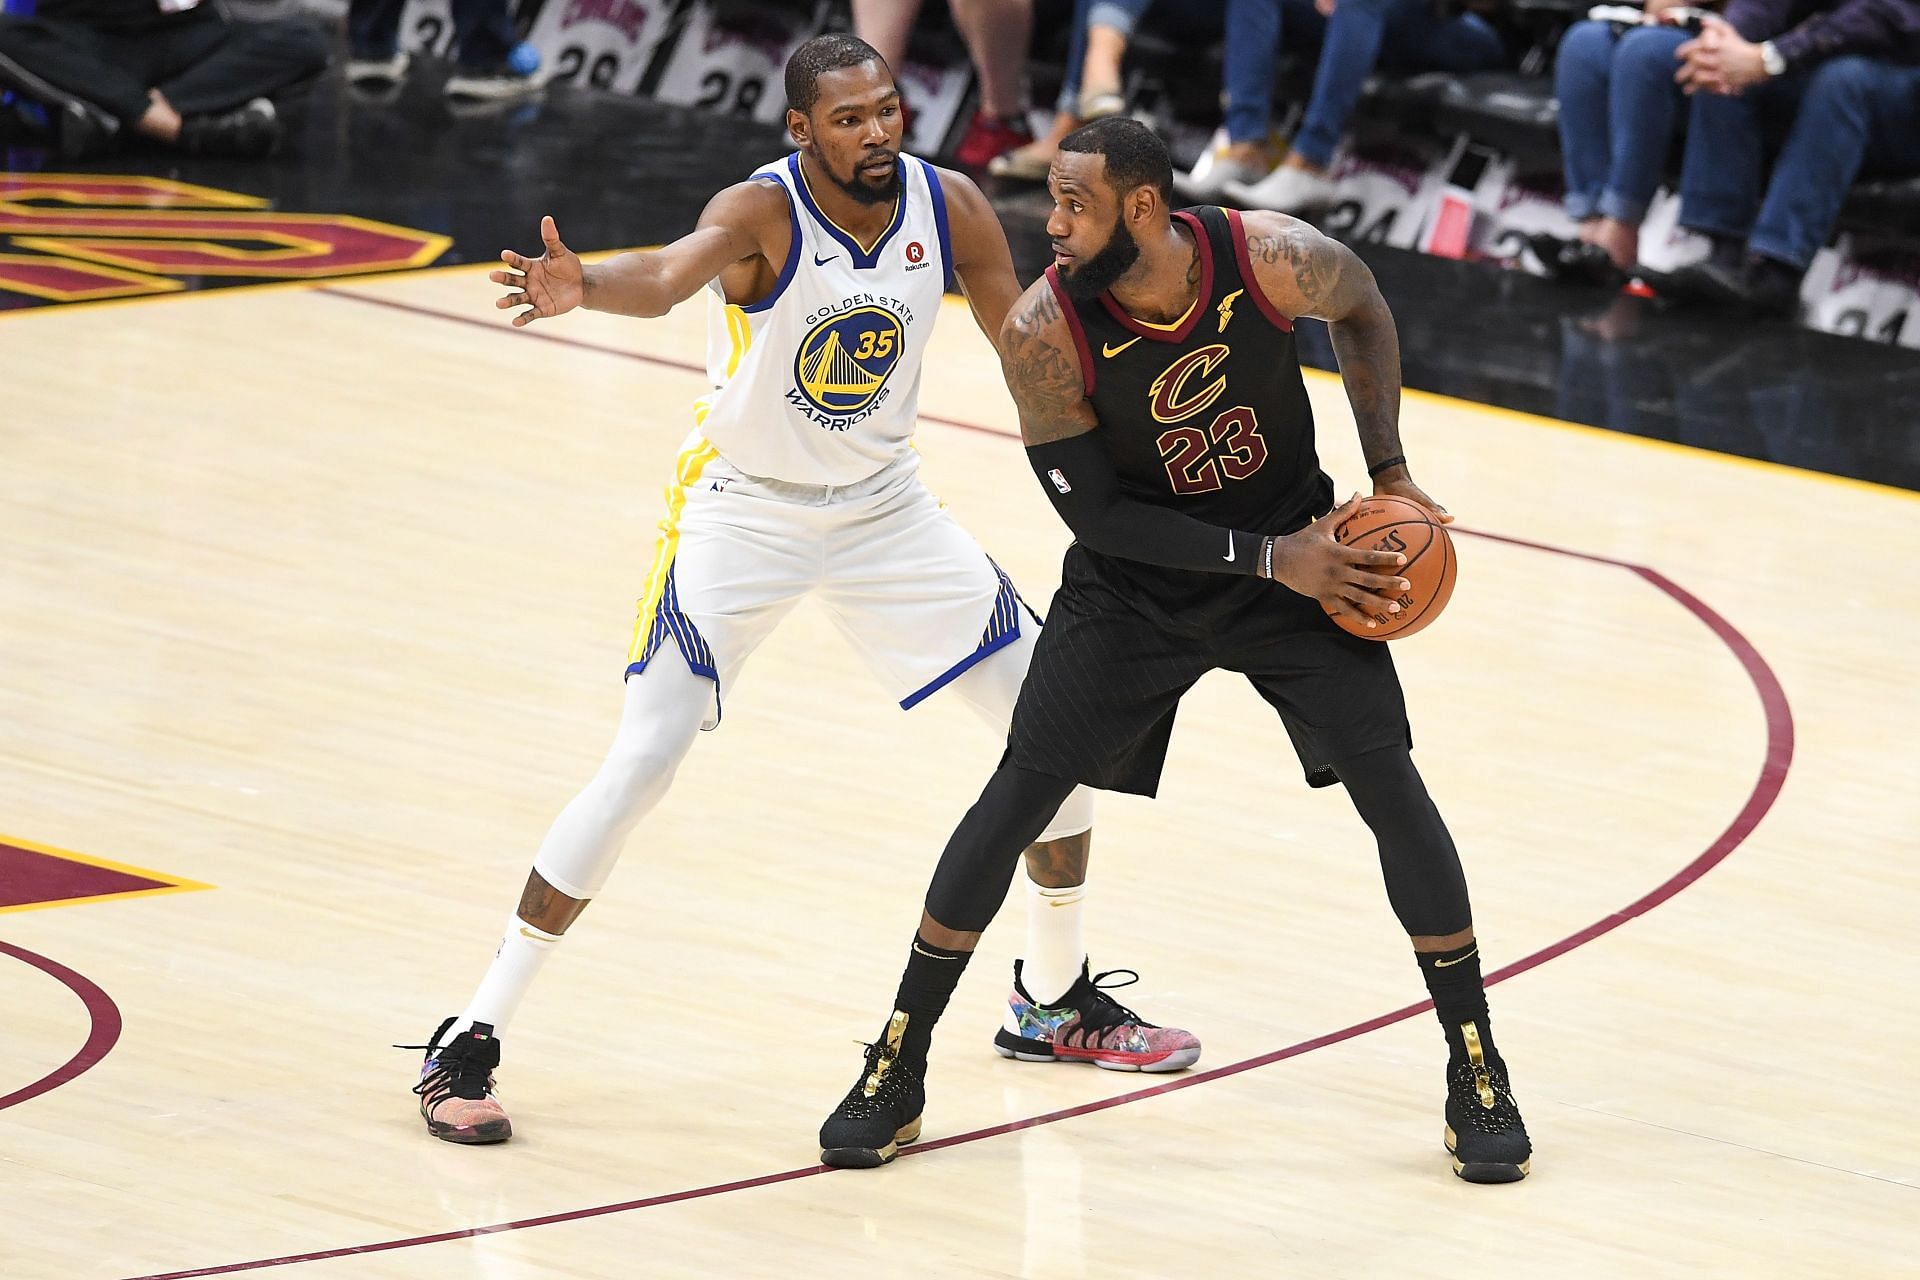 LeBron James #23 defended by Kevin Durant #35 during Game Four of the 2018 NBA Finals.